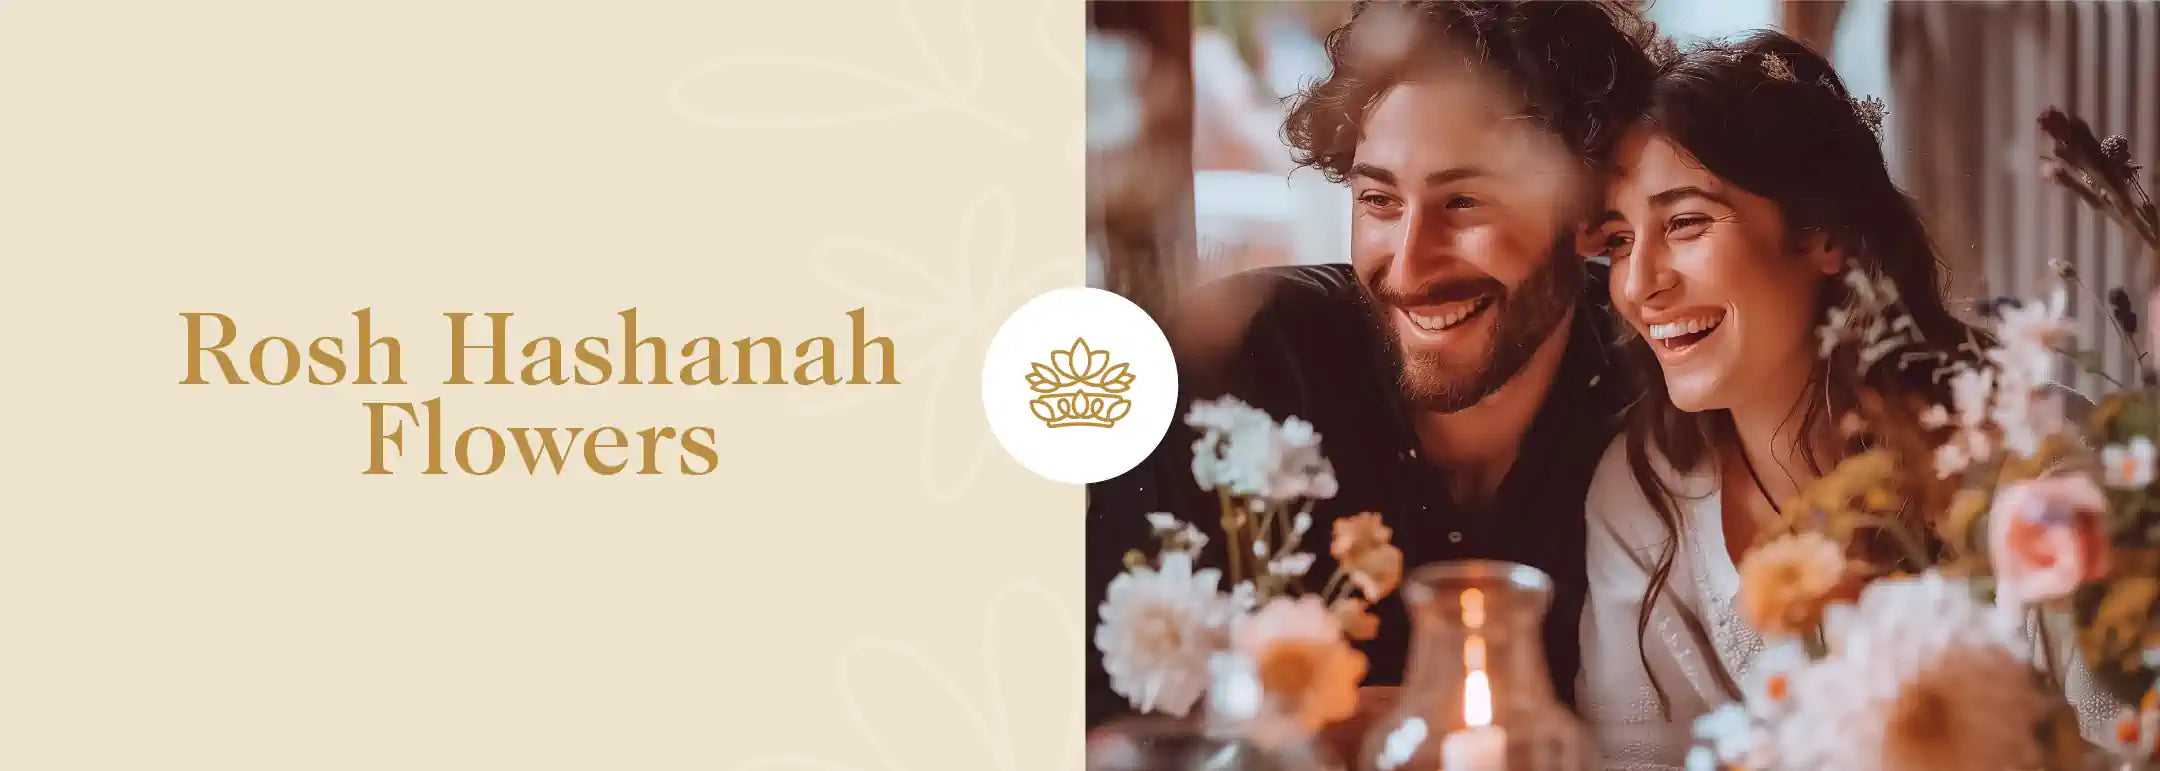 A couple sharing a joyous moment surrounded by delicate Rosh Hashanah flowers, celebrating tradition with warmth and smiles, embodying the spirit of Fabulous Flowers and Gifts.